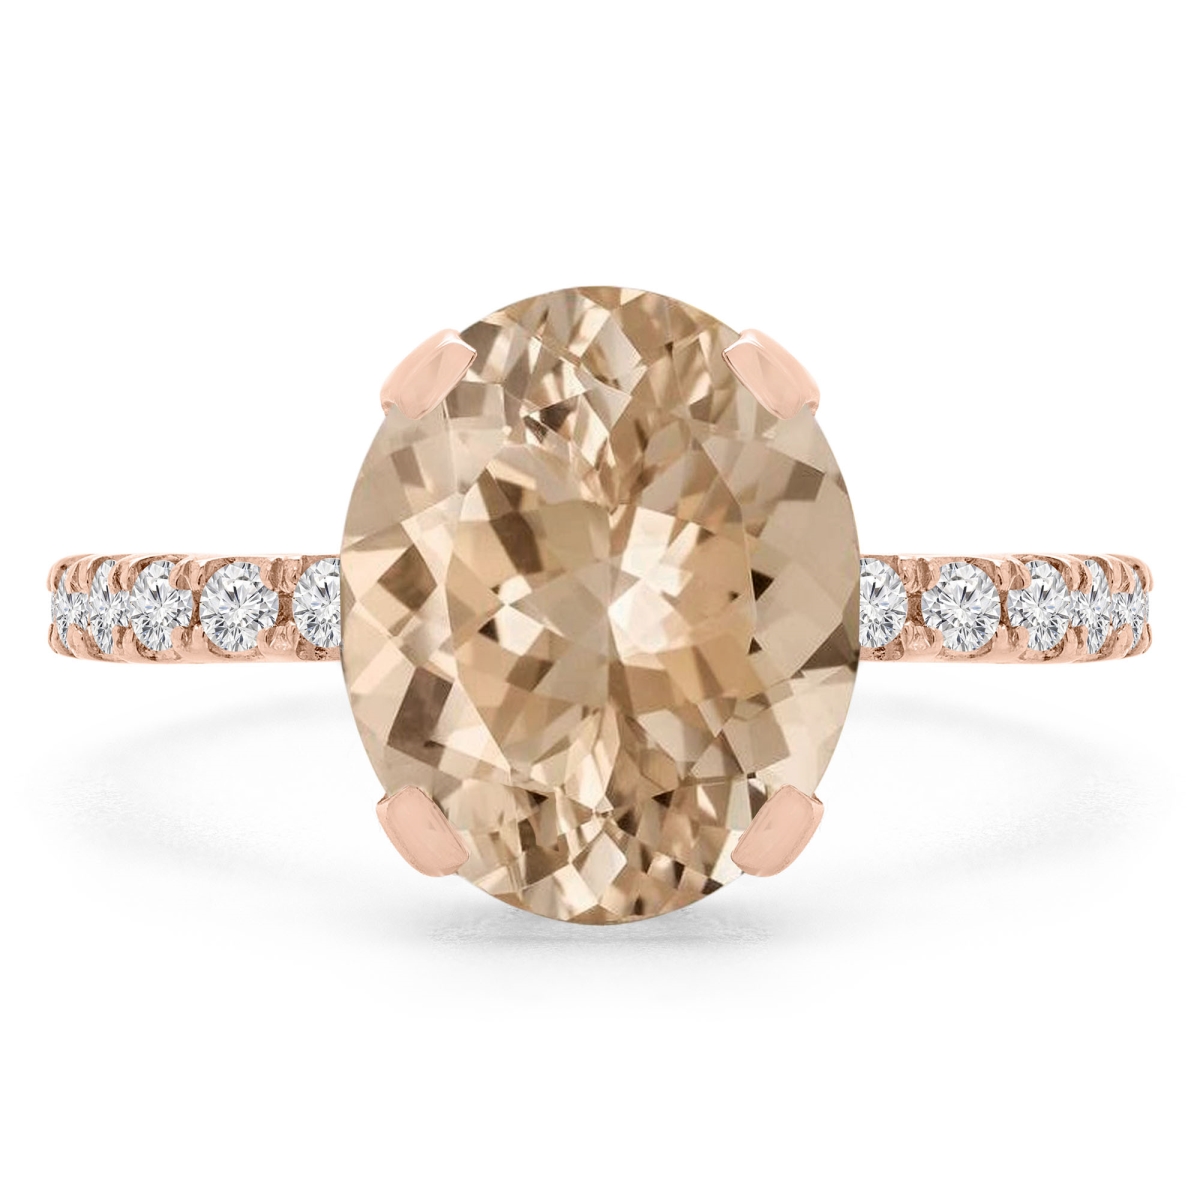 Picture of Majesty Diamonds MD190407-8.75 3.4 CTW Oval Pink Morganite Under Halo Engagement Ring in 14K Rose Gold - Size 8.75